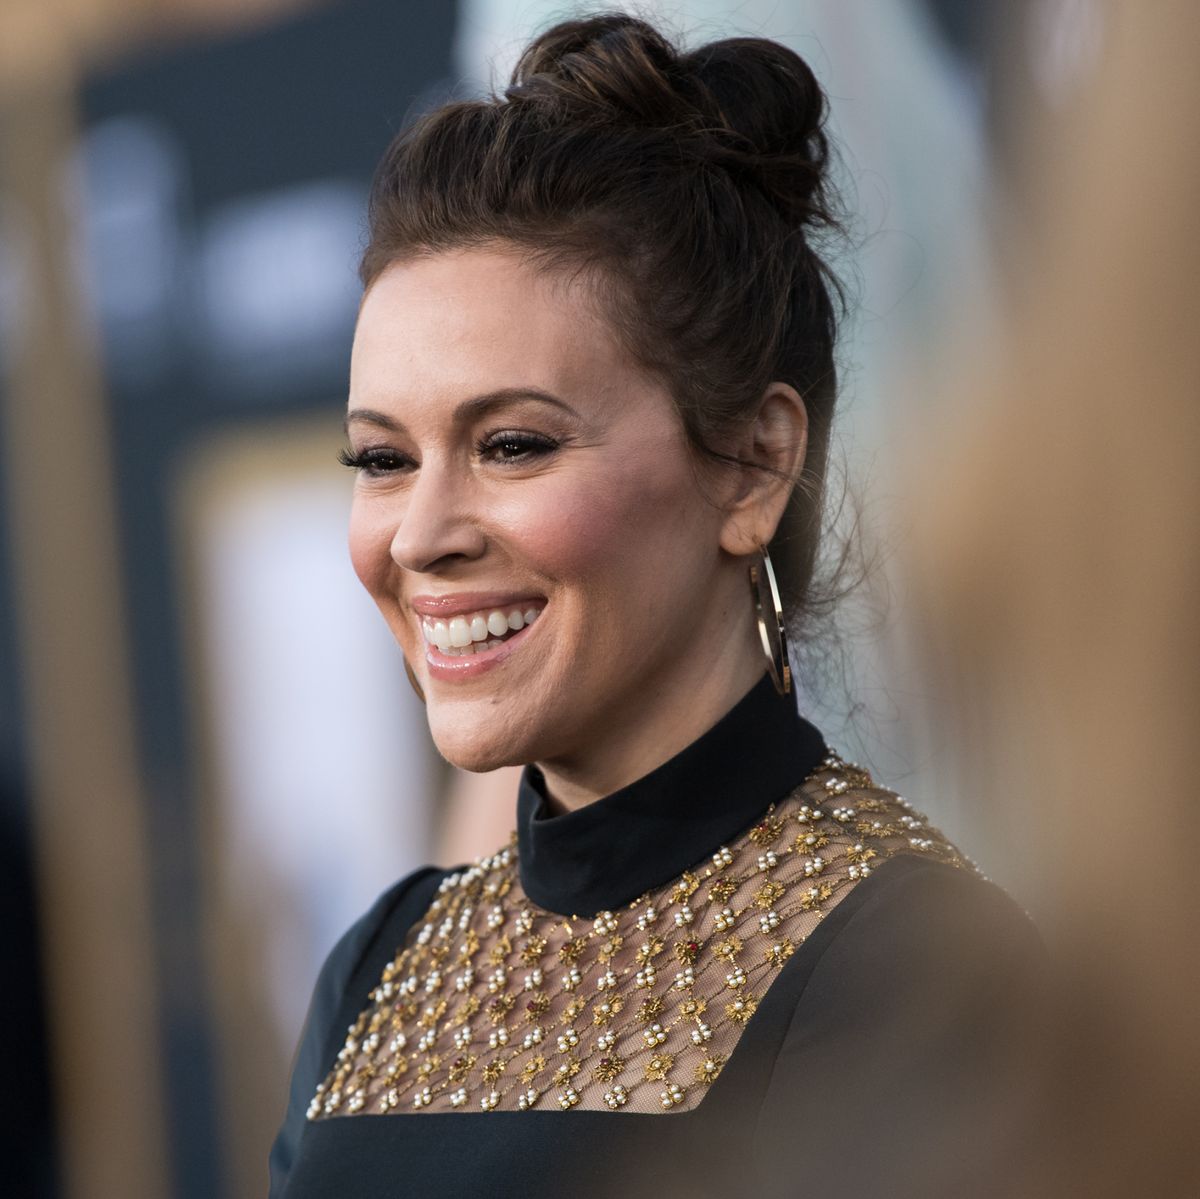 Premiere Of Warner Bros. Pictures' 'A Star Is Born' - Red Carpet